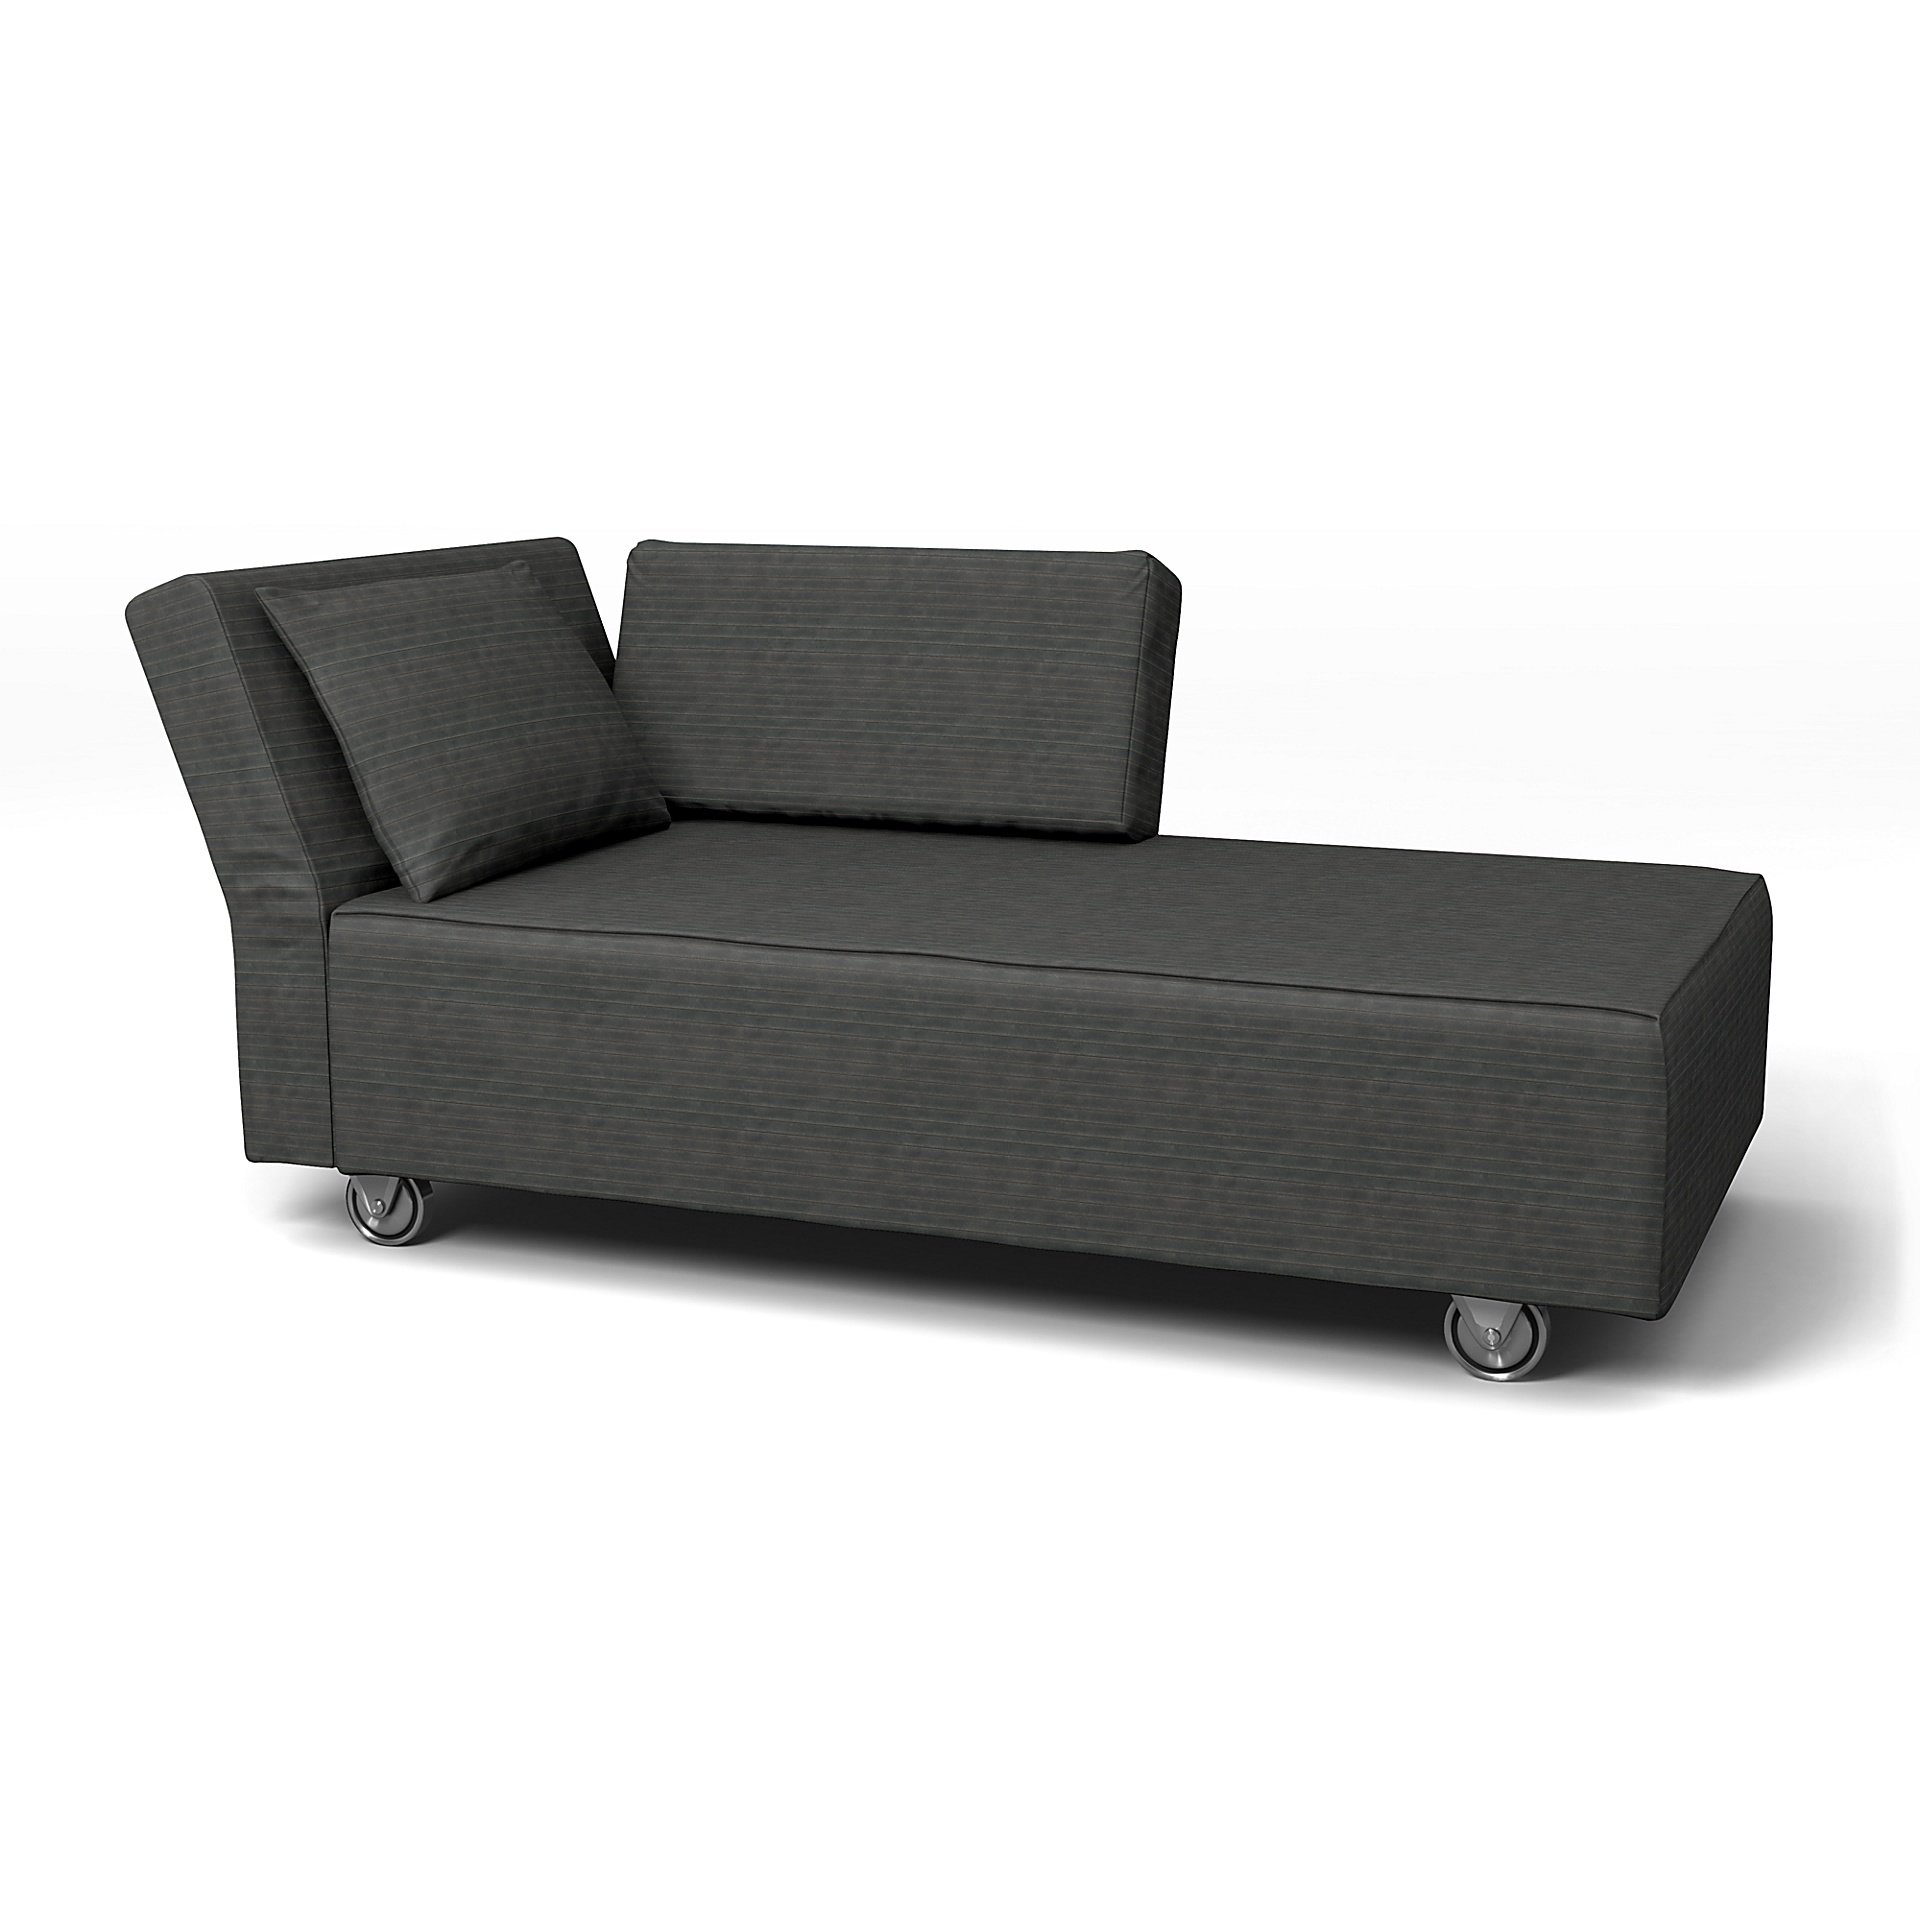 IKEA - Falsterbo Chaise with Left Armrest Cover, Licorice, Corduroy - Bemz